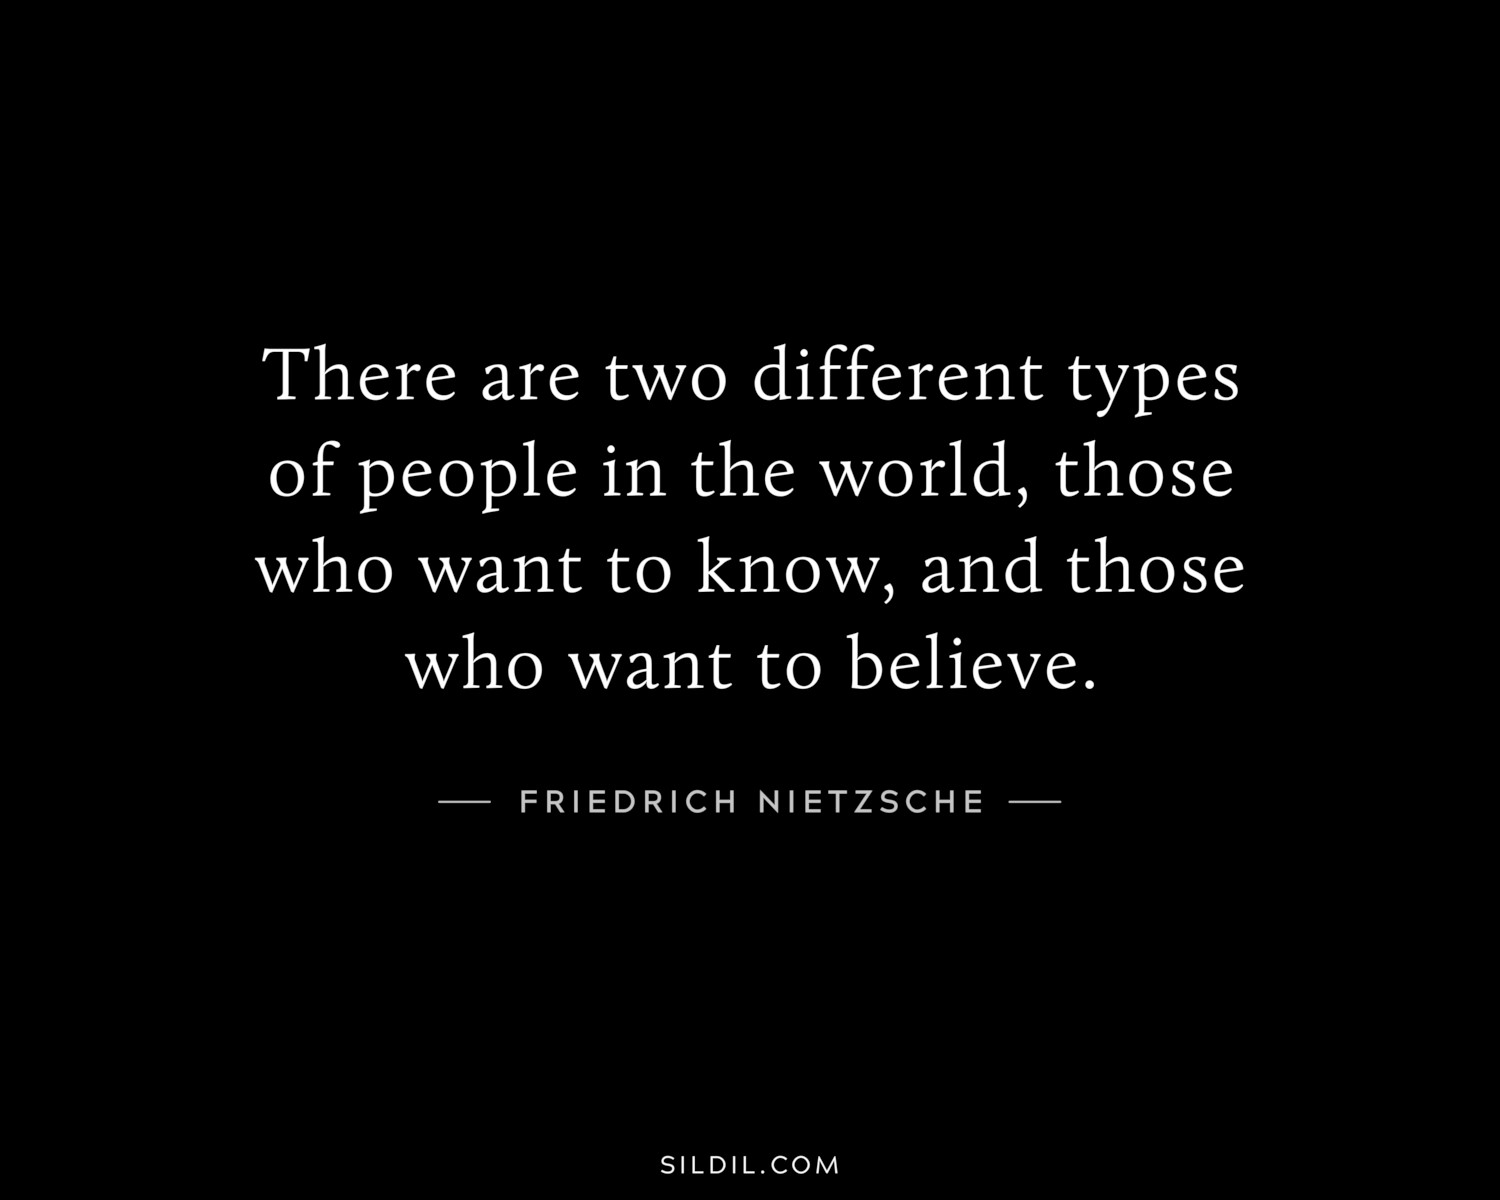 There are two different types of people in the world, those who want to know, and those who want to believe. 